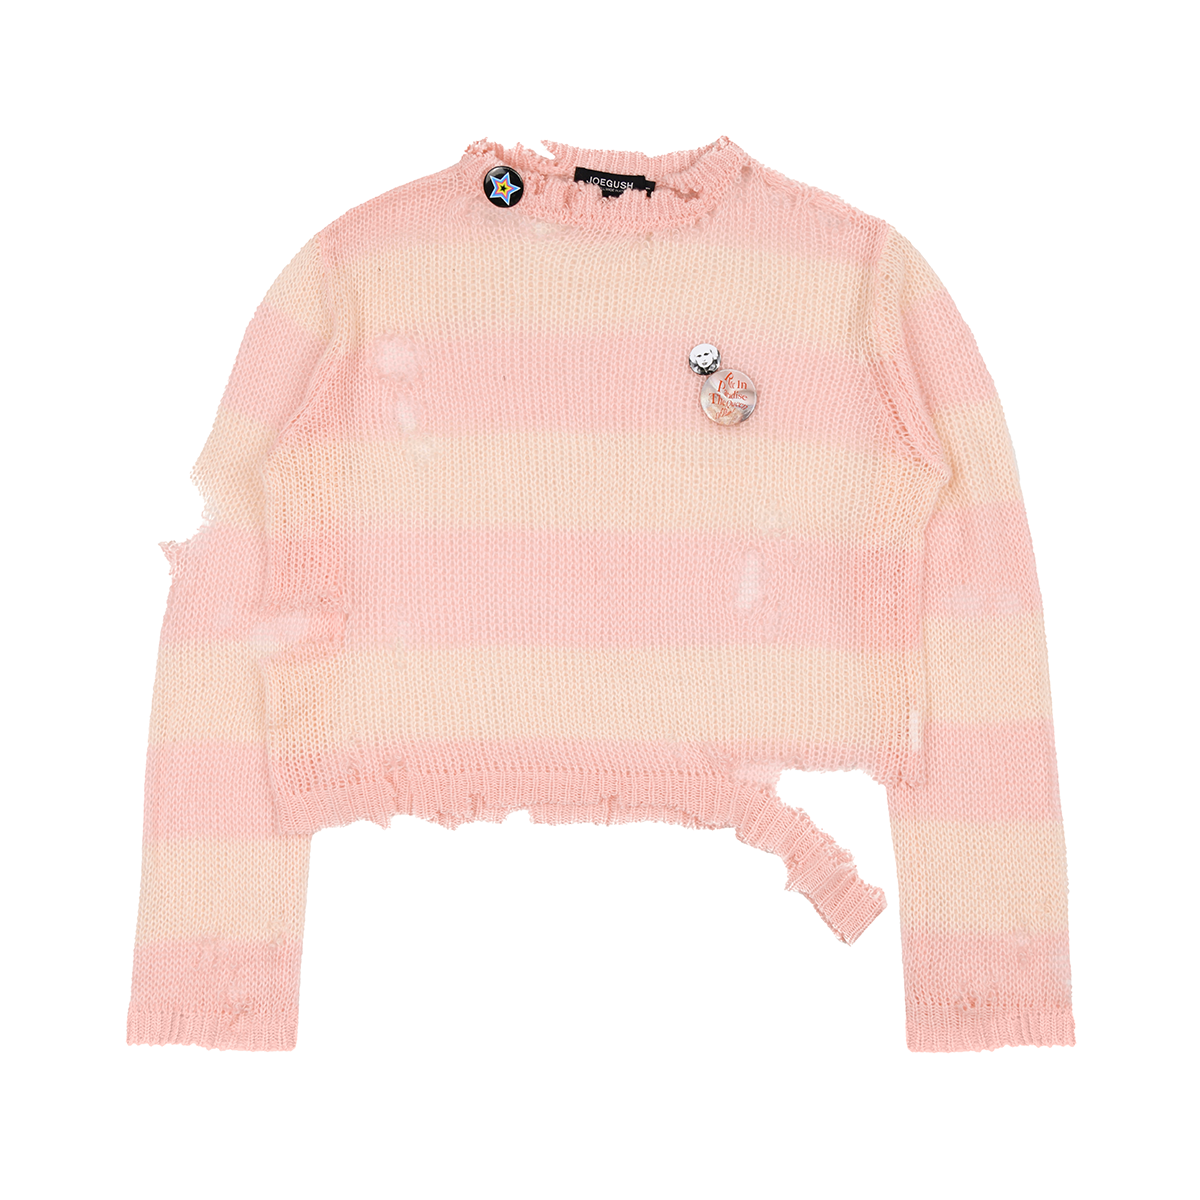 Striped Mesh Knit Lv.2 (Distressed Ver.) (Baby Pink/Peach)